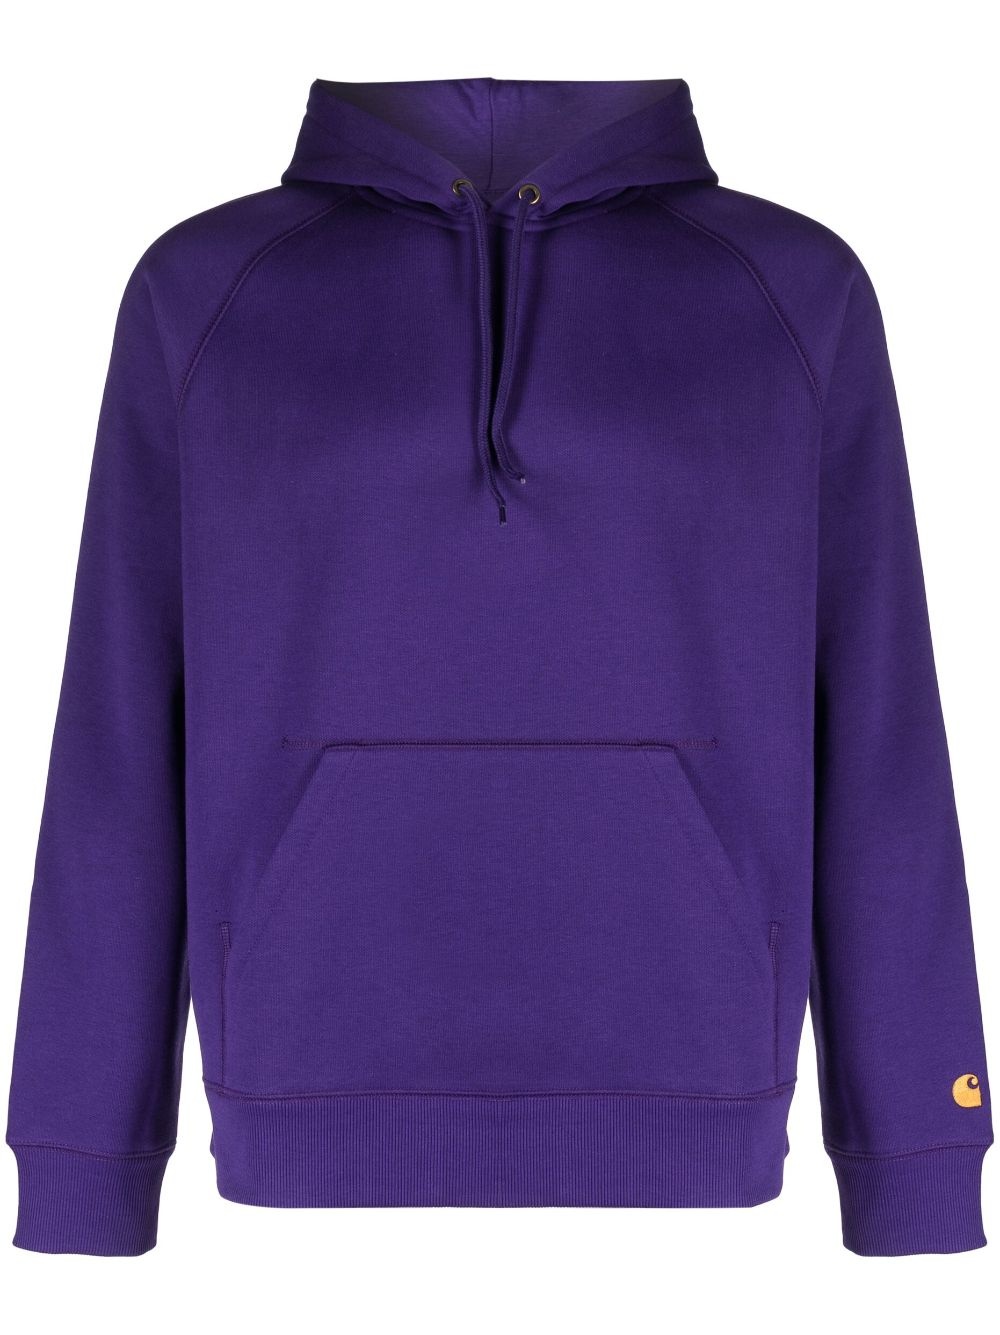 Chase cotton hoodie - 1